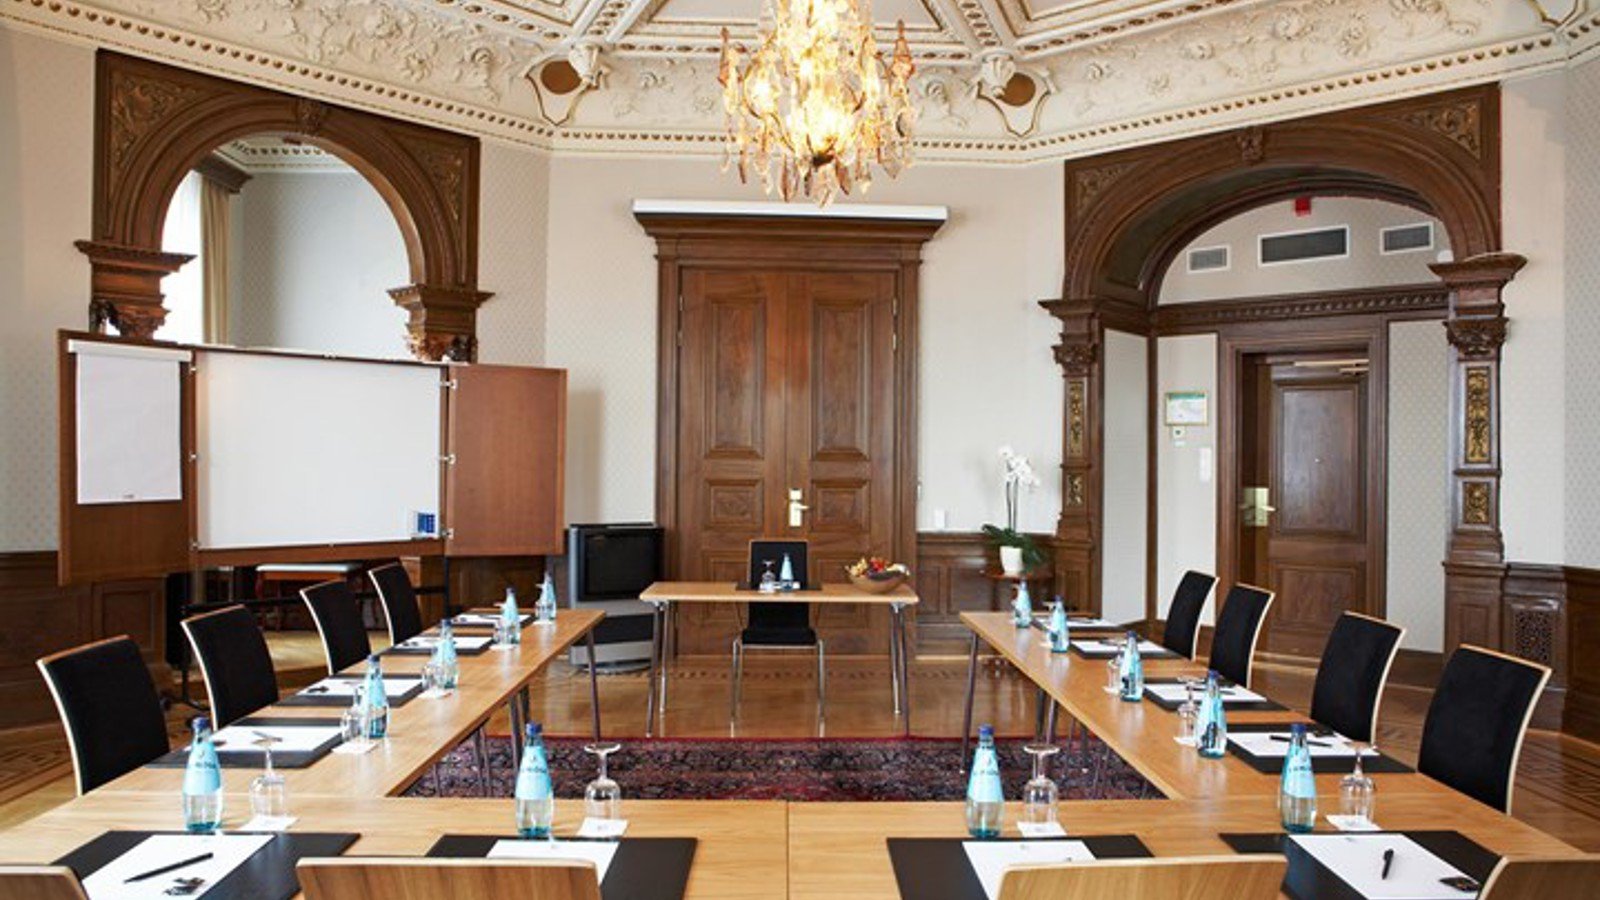 Elegant conference room with wood paneling